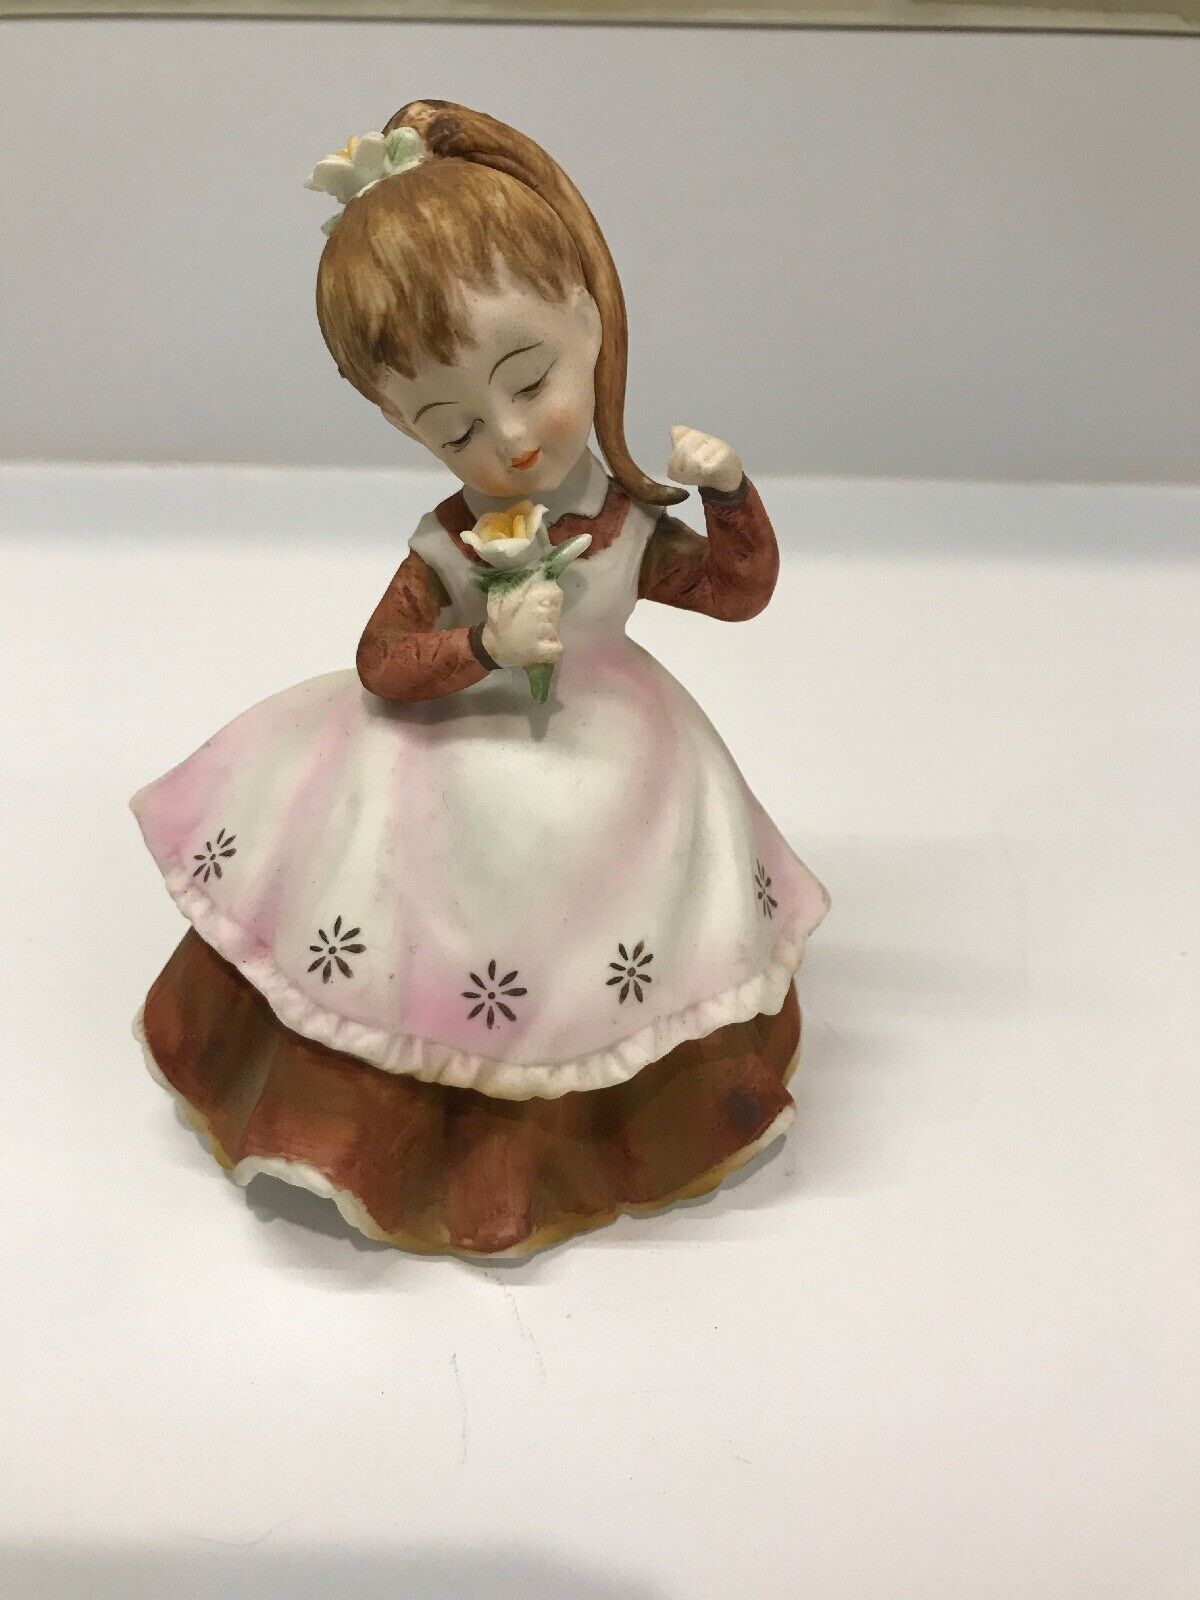 LEFTON CHINA GIRL WITH FLOWERS JAPAN KW 28178 EXC